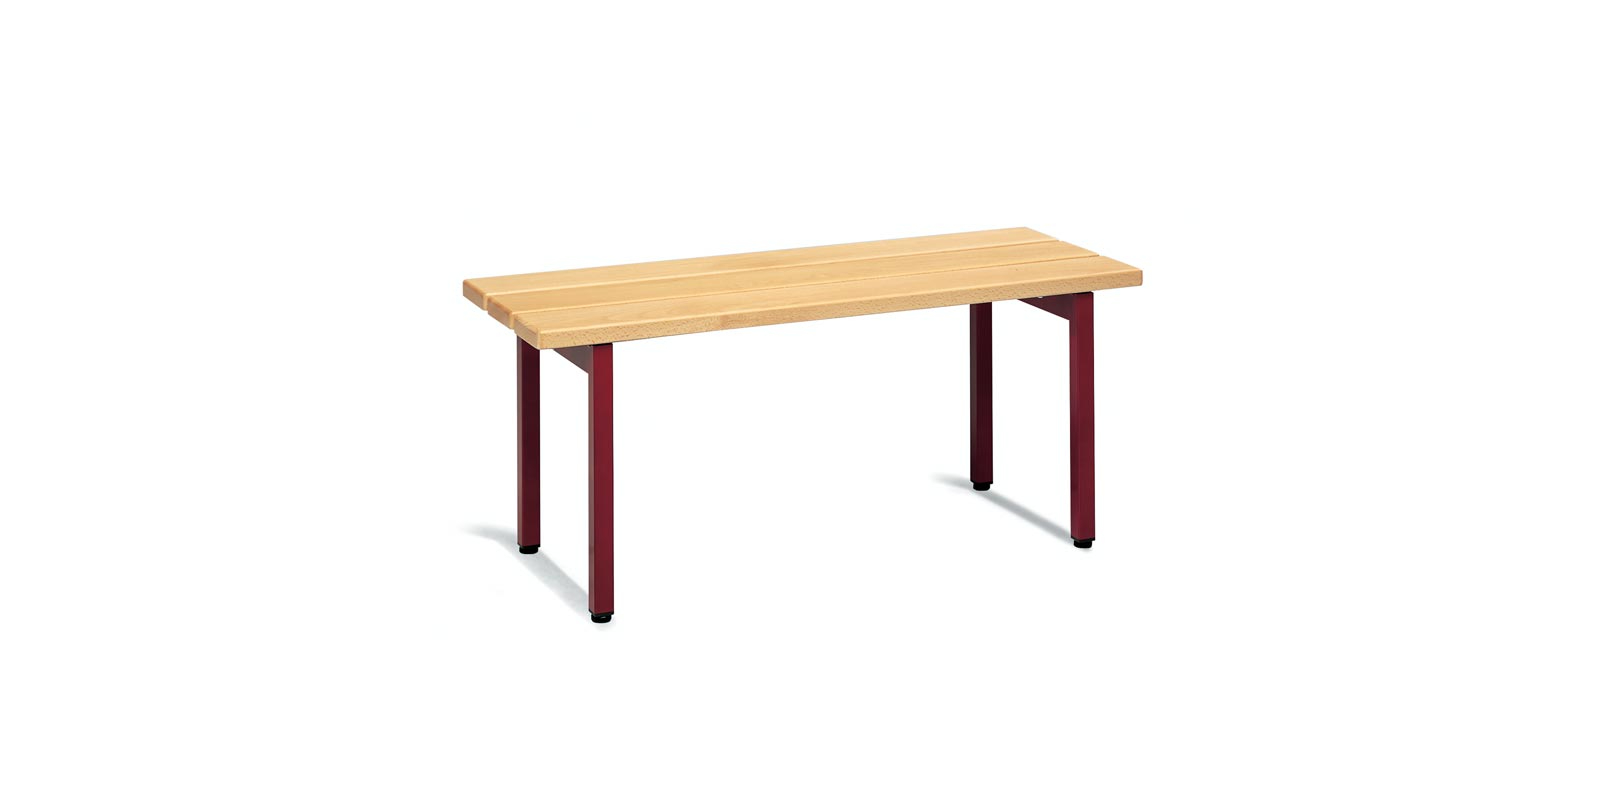 Free-standing bench with three bench slats - WHBA06 (02)